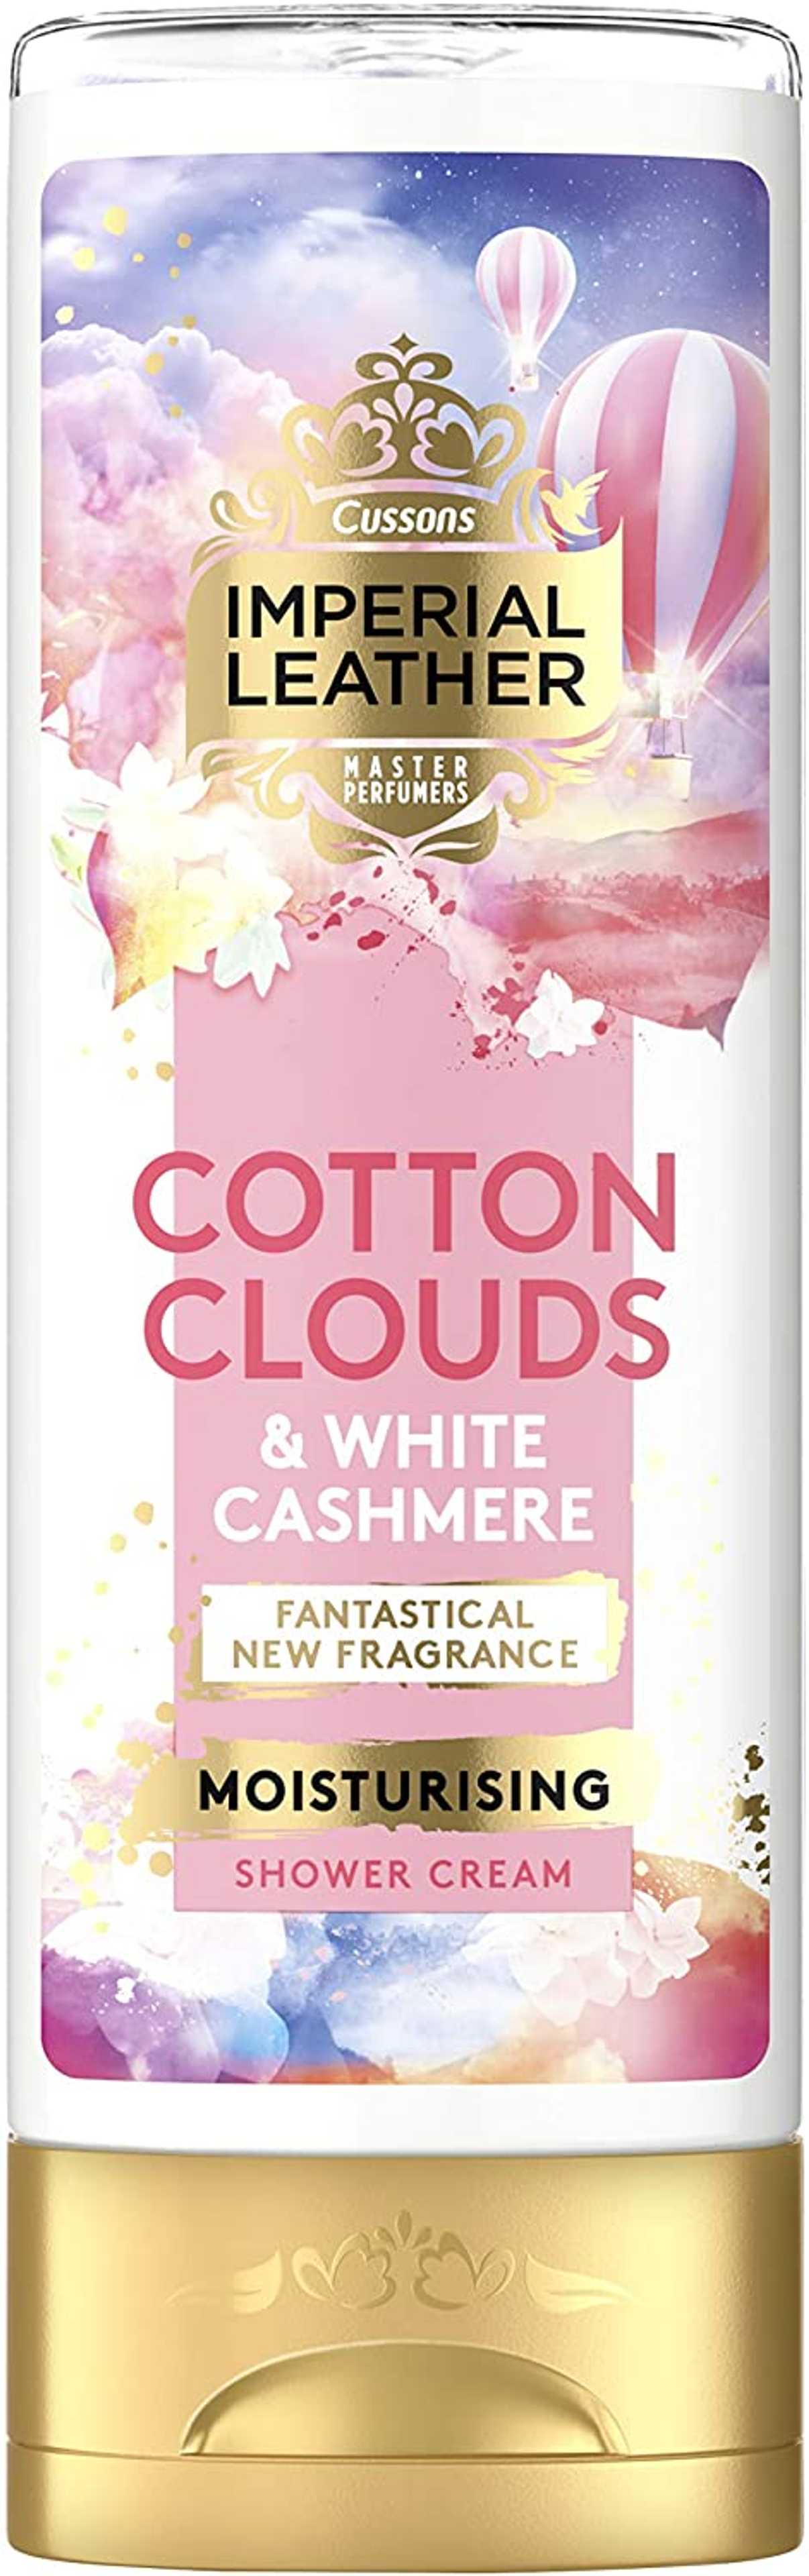 IMPERIAL LEATHER SHOWER CREAM COTTON WHITE CASHMERE 500ML (Imported)